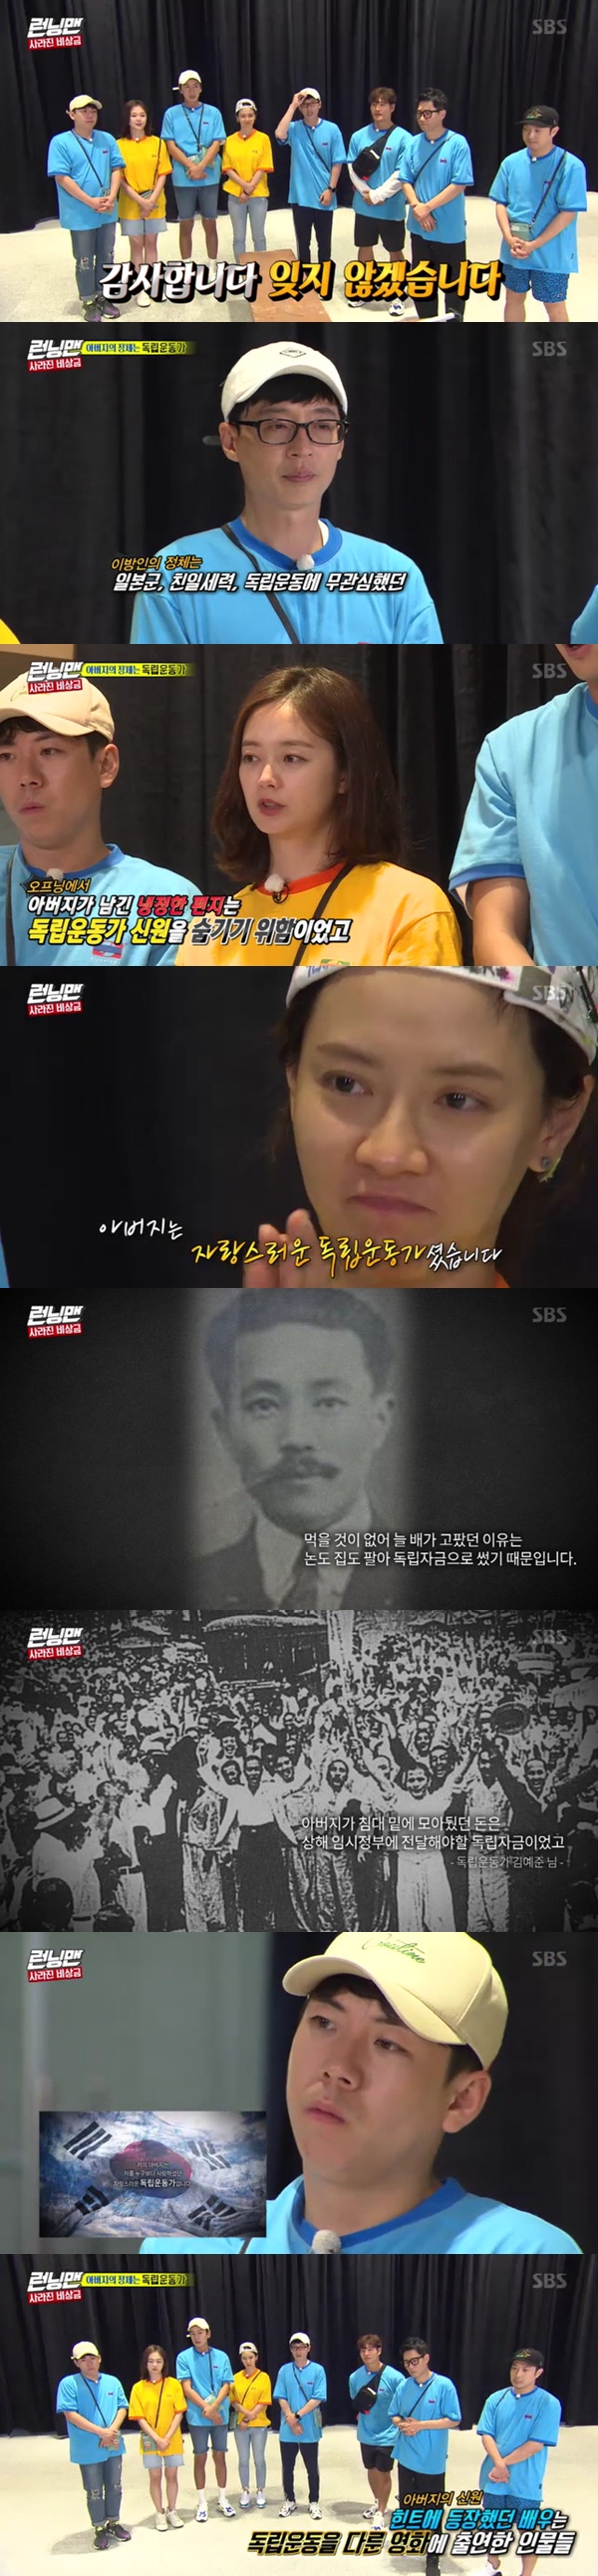 Running Man gave a lot of impression to viewers with the reversal of the past class.On SBS Running Man broadcast on August 18, Race was held to find a father who took 6 million won secretly from his family.The members fought fierce brain fights and chases.The production team said, You own 6 million won in emergency money for 6 siblings, but your father, who was separated as a child, withdrew 6 million won secretly from his children.Personal expenses could not be used at all, and expenses could be borrowed to the production crew.This race, which is less risky to spend less money, was actually a confrontation between children vs father vs The Stranger.The first mission was a lonely meal where the minimum number of people was free of charge, and the most people had to pay 10 times the meal price.Kim Jong-kook complained, Running Man prices are too expensive.Kim Jong-kook Jeon So-min, who is heading for seafood stew & steak house together, expressed doubts about Yang Se-chan, saying, It is time for Yang Se-chan to play a role.Lee Kwang-soo Yoo Jae-Suk Ji Suk-jin Haha stayed at Pyongyang cold noodle house, Yang Se-chan Kim Jong-kook Jeon So-min stayed at a stew house, and Song Ji-hyo stayed alone at a kimchi steamer.The mission was over, and the final mission ended with four cold noodles, one kimchi steamed, and three stews.After all, Song Ji-hyo, who only walked for 30 minutes, won the championship, and got a hint about his father: the four-man cold noodle house loaned ten times the cost of meals.The second mission is to answer the question by increasing the number of letters, Tell me the best game.Among the Haha Jeon So-min Song Ji-hyo who survived to the end, Jeon So-min won the final.Jeon So-min, who got a hint, was suspected of being The Stranger.Kim Jong-kook suspected of storming Jeon So-min, saying, Its weird that I followed, and Yoo Jae-Suk said, Do your game too hard.The Stranger, with his fathers identity in the middle of the day, members moved to the next mission site.The third mission was a queezing shot goal-in that required listening to the views and correct answers and inferring the problems; Jeon So-min hit the problem at super-fast and eventually won another final.The members doubts deepened. So, Jeon So-min sat down and appealed for innocence.The members were convinced that the Ace was the Stranger with the explosion of Jeon So-min.Next, you can choose one of the hints of your father and The Stranger.If the father was to be In-N-Out Burger to The Stranger, The Stranger would win, and The Stranger would win the In-N-Out Burger number X100.The high prize money was obtained only by making the children as much as possible in-N-Out Burger and the father in-N-Out Burger.However, if the same child made the Stranger & father an In-N-Out Burger, the child could win the championship alone and win 6 million won.The Stranger and their children had to put their fathers name tag on the correct answering board to become the main character of the final championship.Jeon So-min, who was suspected of being The Stranger in a situation where he had to make The Stranger as In-N-Out Burger as much as possible, suspected Yang Se-chan.Jeon So-min lay down in his seat, saying, I will go crazy about injustice in doubts directed at him.I have such a day, said Jeon So-min, desperately claiming to throw away his belongings.In the meantime, Haha and Song Ji-hyo were eliminated in succession during the tracking process, and Kim Jong-kook took the name tag of the suspicious Jeon So-min.But Jeon So-min wasnt The Stranger, and Kim Jong-kook was also a child.As the child tore off the name tag of the child, both Jeon So-min Kim Jong-kook became In-N-Out Burger.Lee Kwang-soo Yoo Jae-Suk Yang Se-chan Ji Suk-jin is the only situation left.The fact that the father and The Stranger were among them was mixed in the members were in a state of chaos; Lee Kwang-soo ripped off the name tag of Yoo Jae-Suk for monologue.But Yoo Jae-Suk was a child, and as a result both were In-N-Out Burger.The father of the six sisters and the secret agent who lost his memory was Ji Suk-jin.The production team said, I decided to walk the gambling, and Ji Suk-jin showed his determination to show tremendous performance; like a lie, Ji Suk-jin won without any performance.In the bloodless situation of the past, Ji Suk-jin shook his head, saying, I did not want to win this hard.The Strangers identity turned out to be Yang Se-chan, who took on an important role in two years.Meanwhile, there was a reversal in this race.The father who had to hide his identity was Korean independence movement, and the 6 million won he secretly withdrew was an independent fund.Most of the children of Korean independence movement were misunderstood about resenting and taking money before they knew that their father was Korean independence movement.The cool letter of the opening day reflected the reality of the fathers who had to hide the identity of Korean independence movement, and three lunch menus, kimchi stew, seafood stew, and Pyongyang cold noodles were the food that Korean independence movement ate.The hints presented by the production team were characters in the film about Korean independence movement, and the passwords for Japanese police, secrets, and pro-Japanese.The proud faces of Korean independence movement such as Kim Gu, Choi Joo Ho, and Kim Ye Jun were revealed on the screen.I did all the stars at the opening, he said.The production team said, The Stranger was burdensome, but we symbolically expressed our indifference to the Japanese, pro-Japanese, Korean independence movement.The Stranger Yang Se-chan was so hot, and Lee Kwang-soo was proud to say, I caught it with my hand.On this day, Running Man did not carry out penalties instead of donating 6 million won in the name of Ji Suk-jin, who played his fathers role.The prize money was to be donated to the Korean Association of the Remainers of Independence, which was more meaningful than ever.I learned a lot, it seems like a history to not forget, said Yoo Jae-Suk, finishing the broadcast.Today, there are many Korean independence movement that we can live in today as blood and tears.I will not forget it, he bowed.bak-beauty